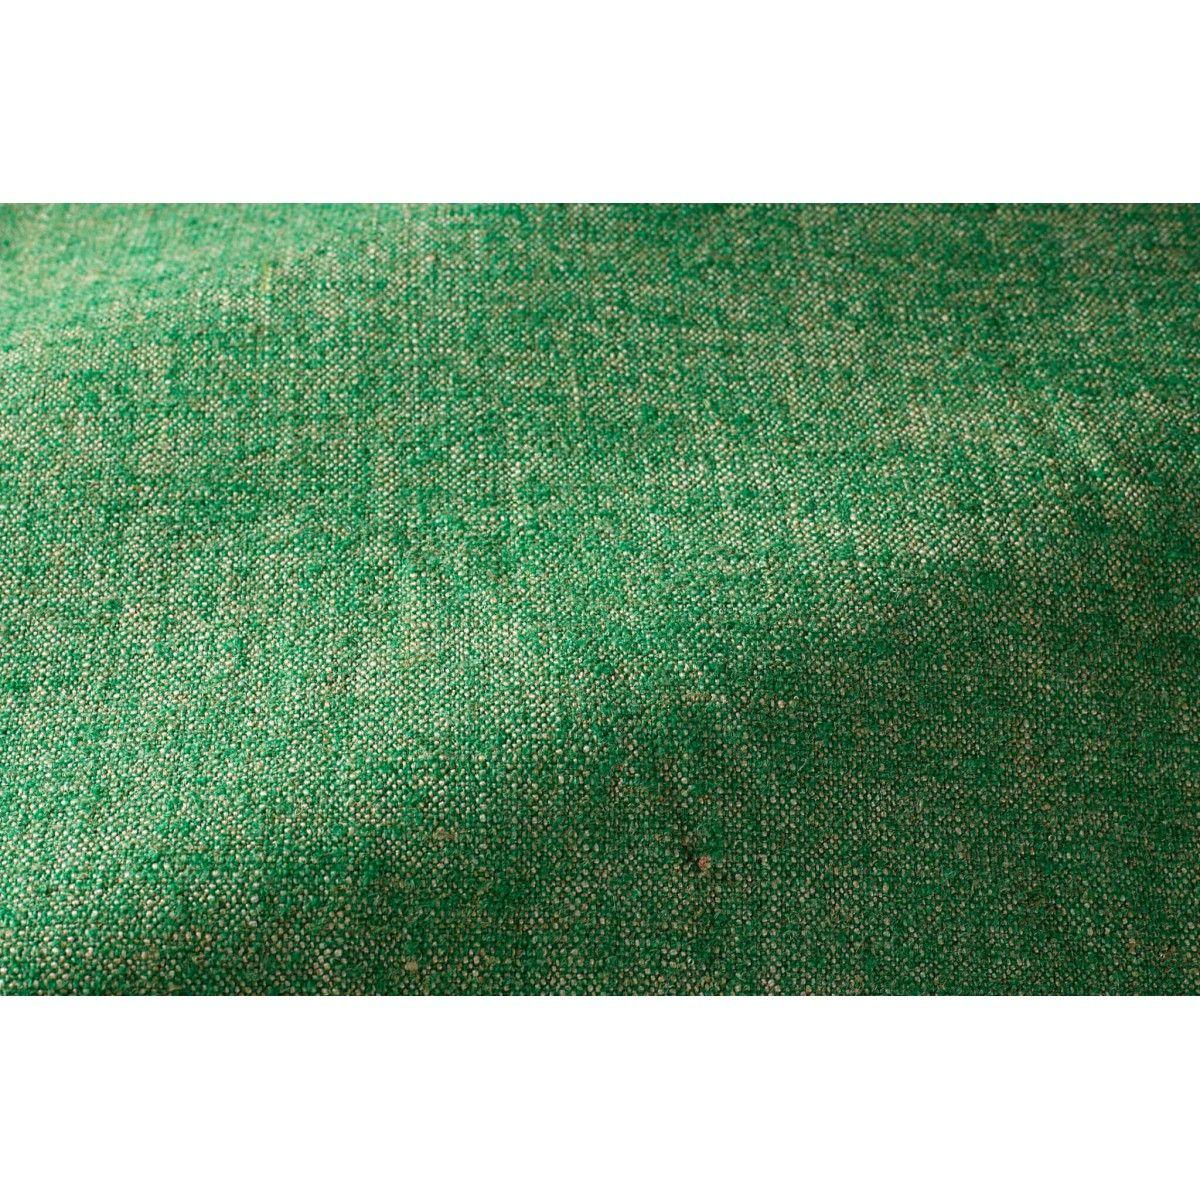 Popus Editions Giovanna 3 Seater Sofa in Emerald London Linen Fabric.

Giovanna is a sofa with a strong profile. A sober, plush line, with this famous detail that changes everything, so as not to forget its strength of character and this charming